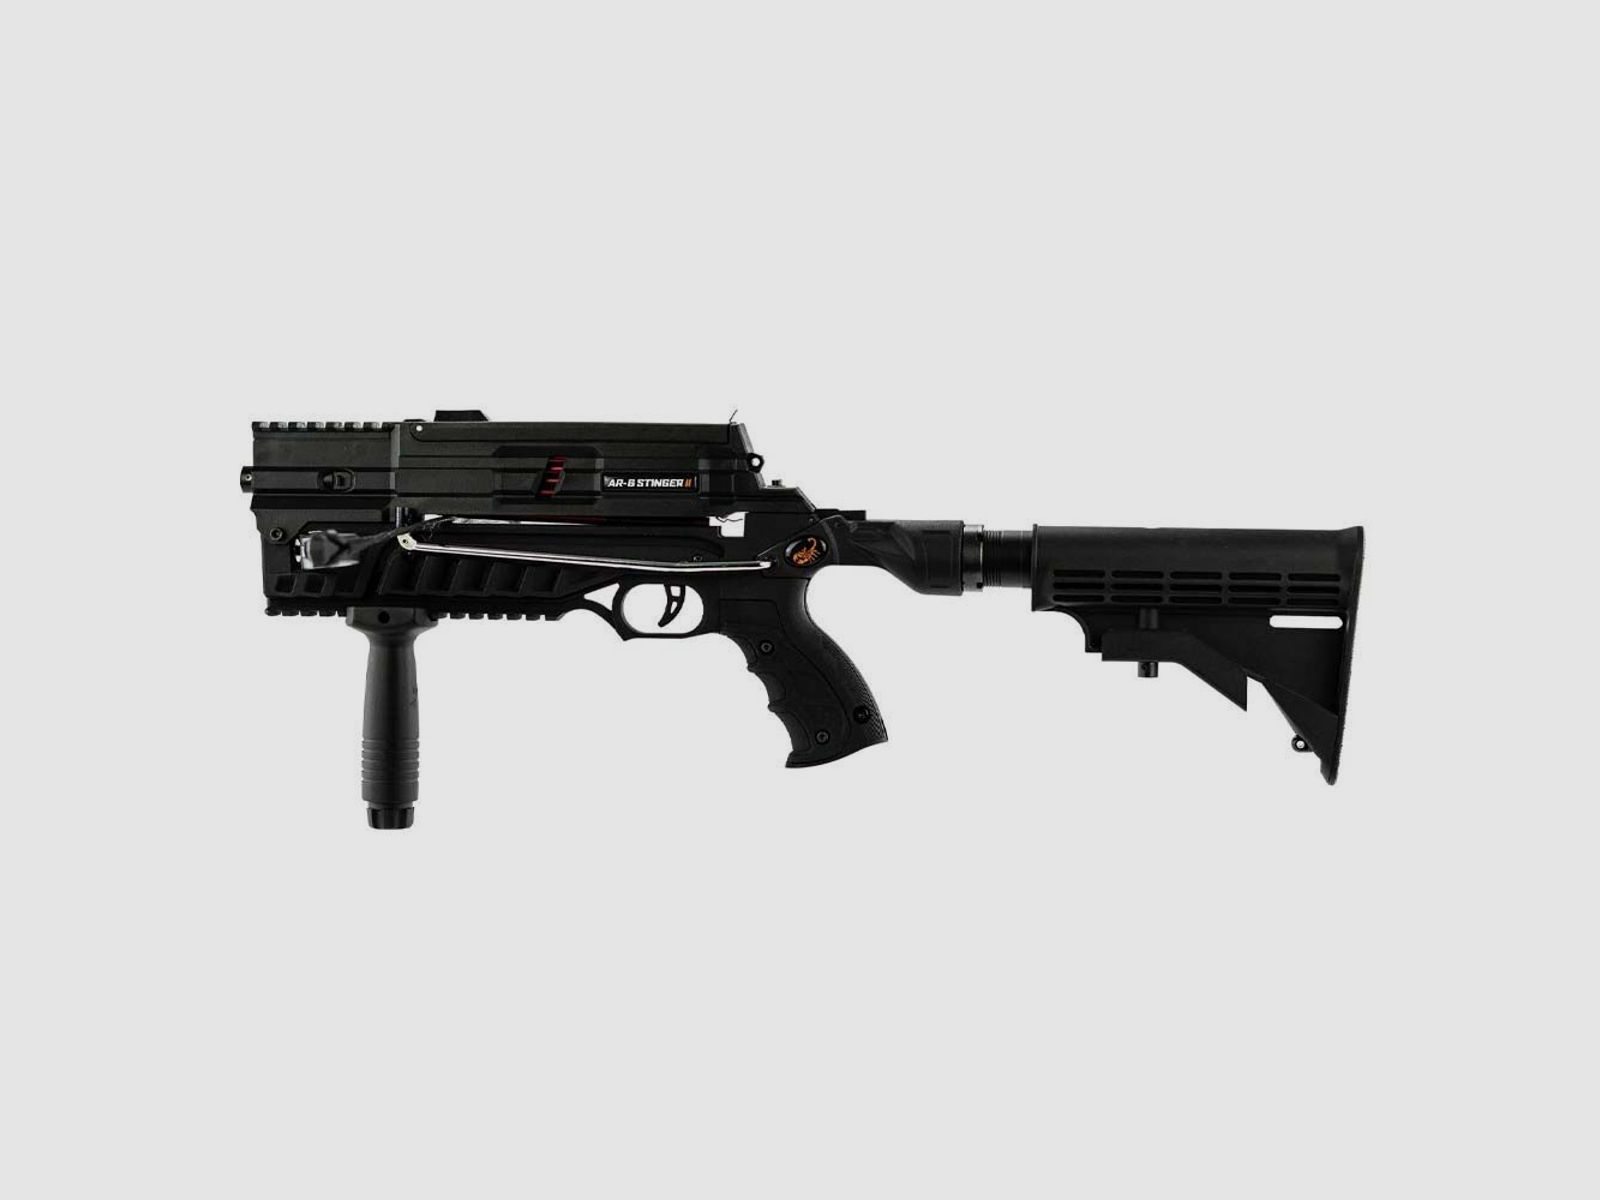 Steambow AR-6 Stinger 2 Tactical Gewehrarmbrust